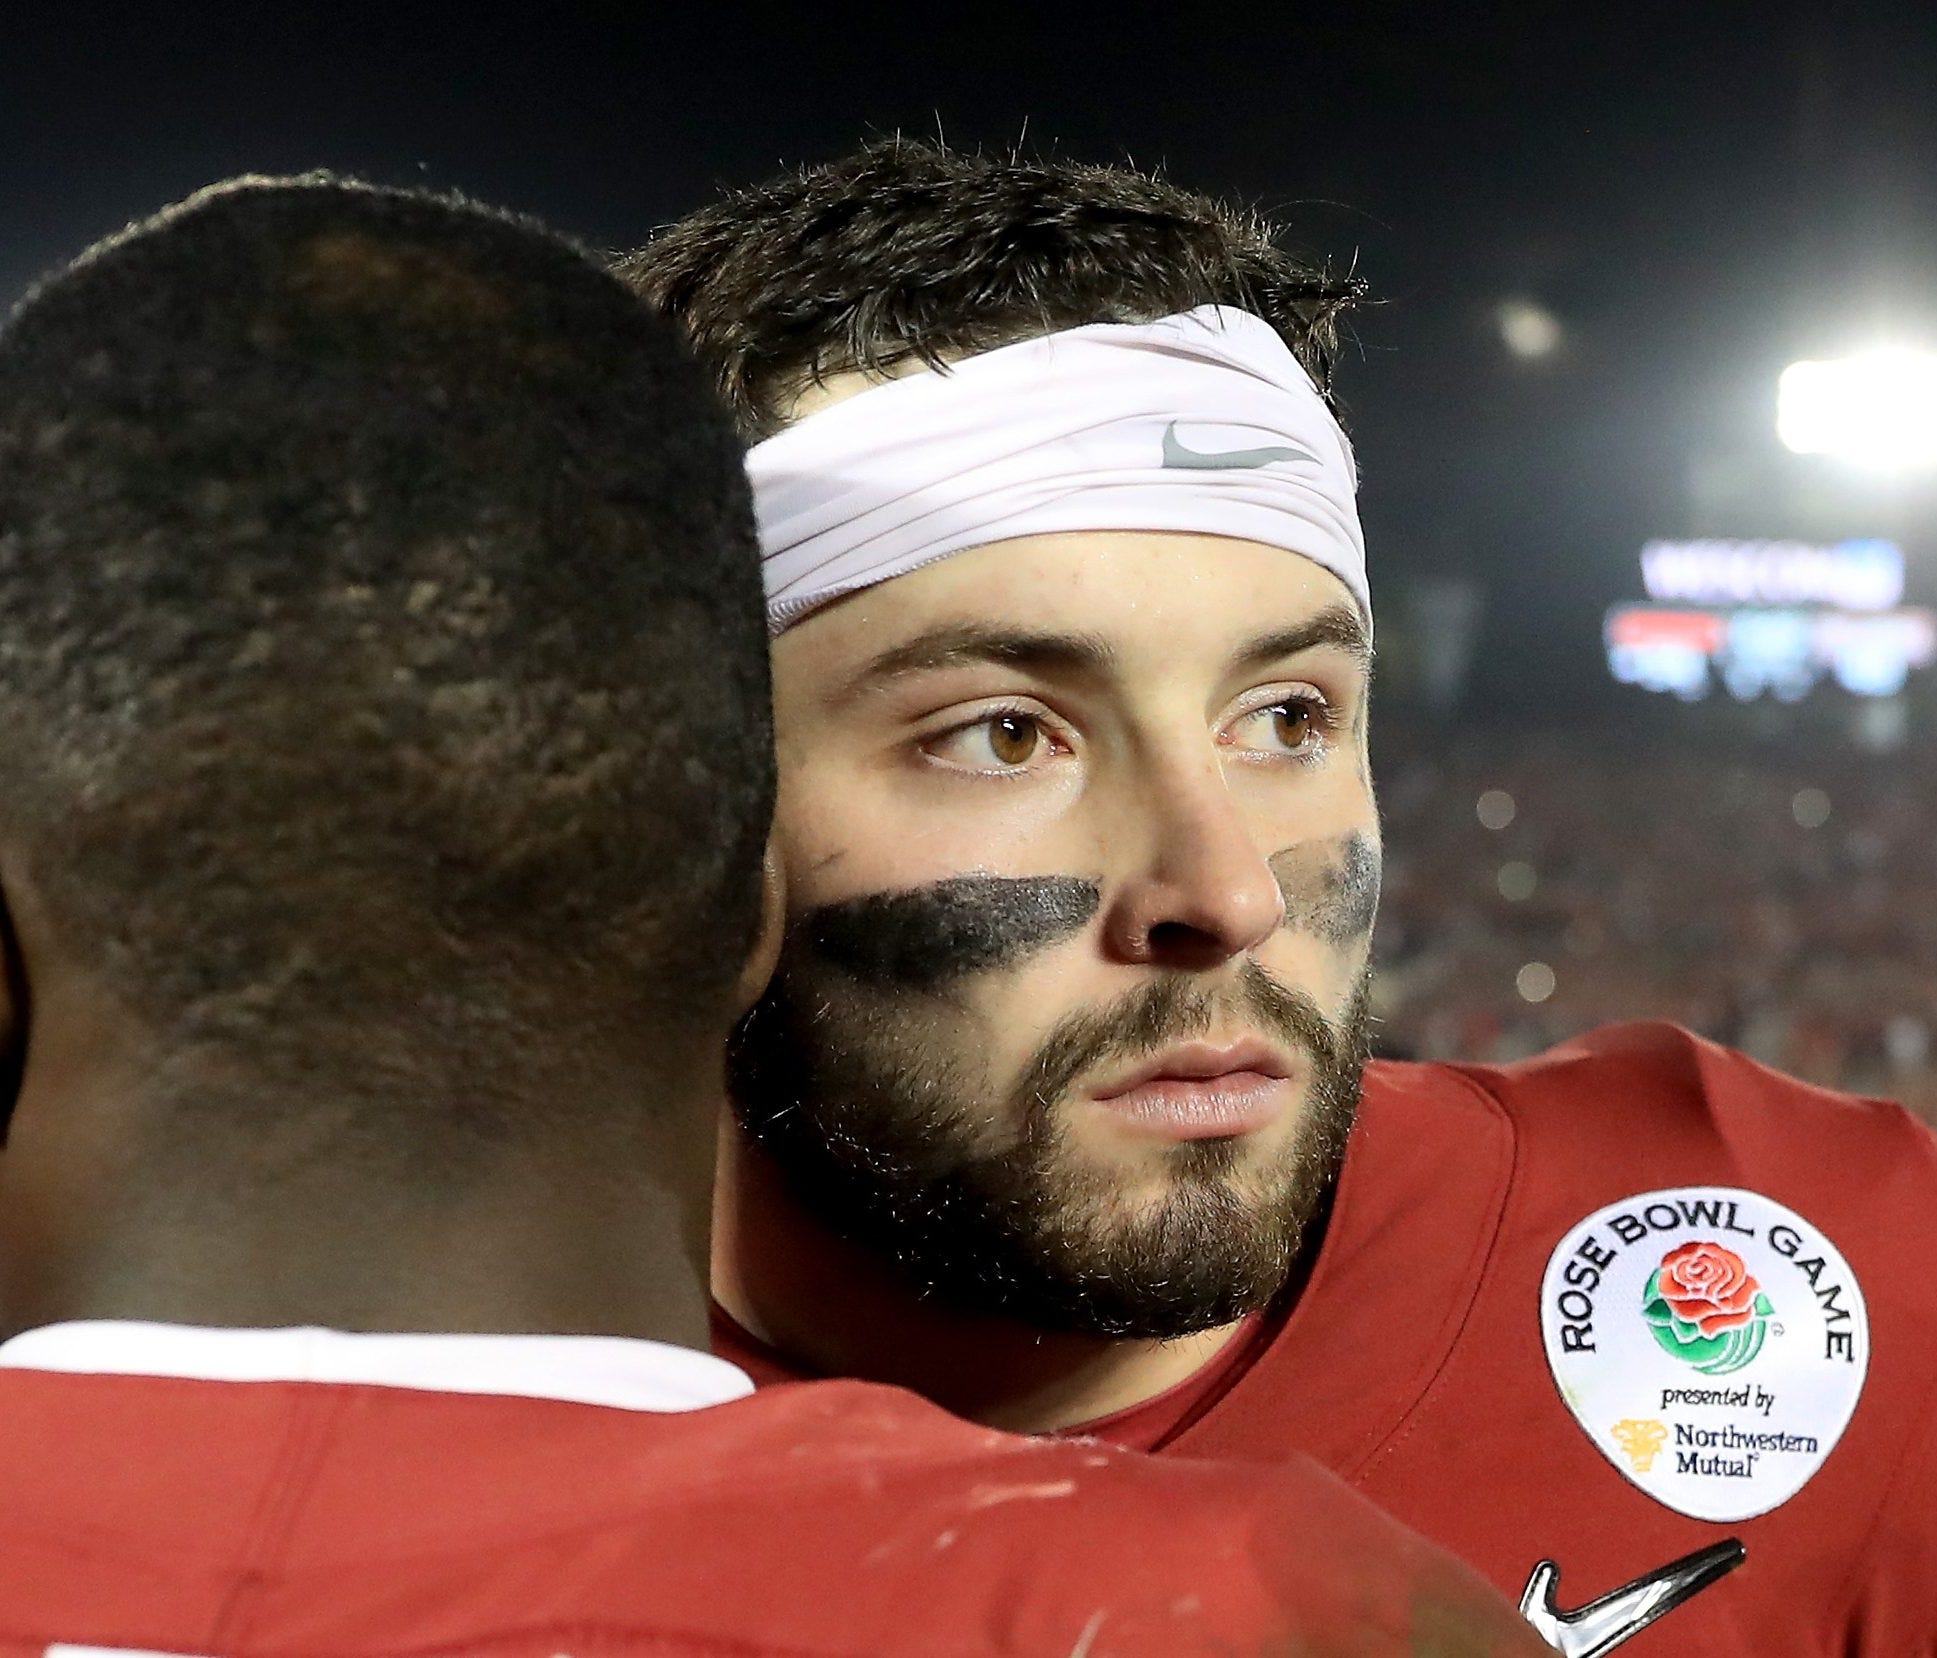 PASADENA, CA - JANUARY 01: Baker Mayfield #6 of the Oklahoma Sooners and Marquise Brown #5 of the Oklahoma Sooners hug after playing in the 2018 College Football Playoff Semifinal Game against the Georgia Bulldogs at the Rose Bowl Game presented by N